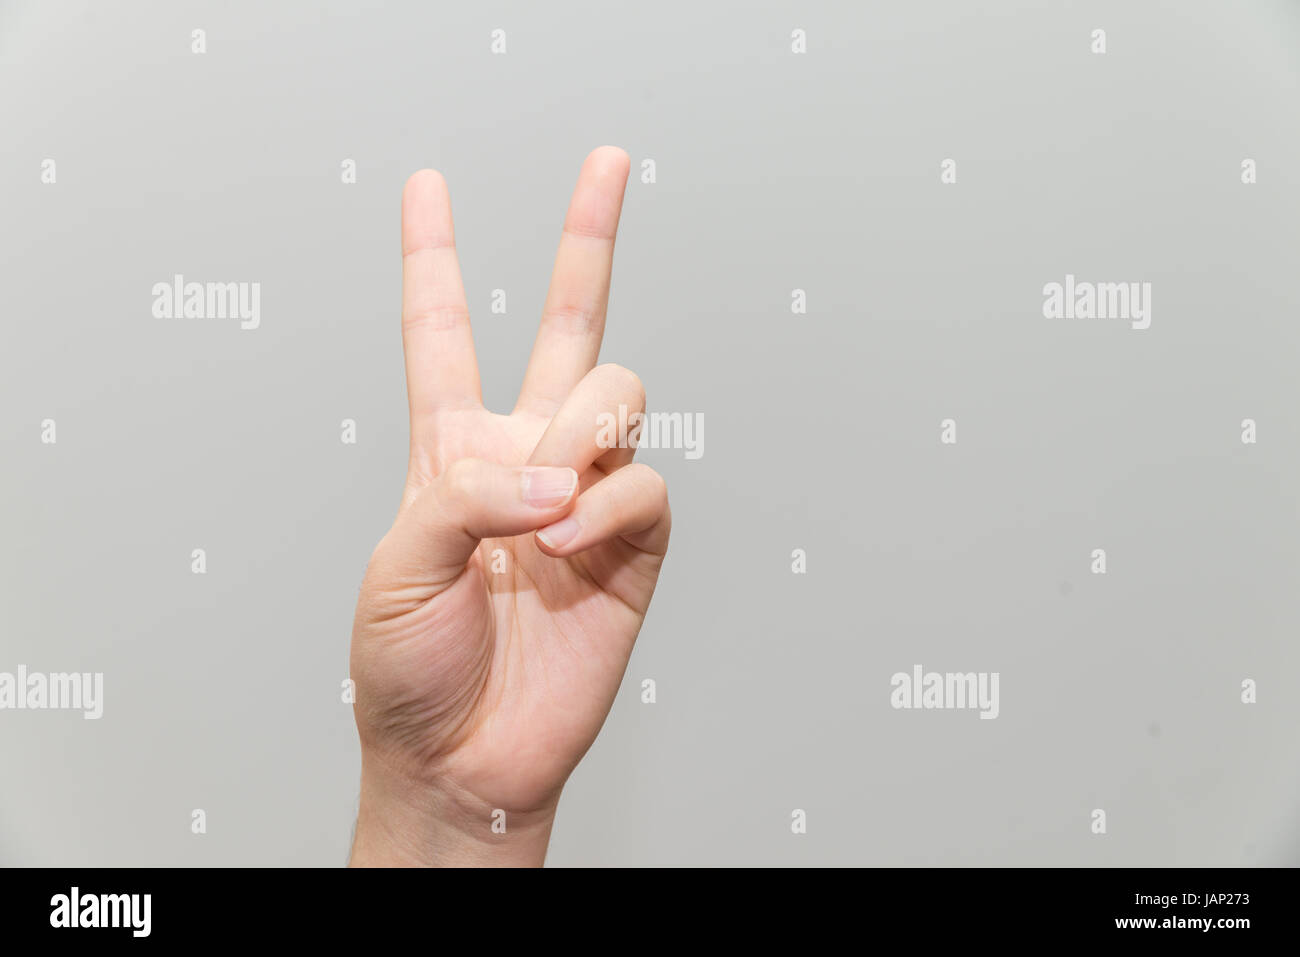 Two Fingers Hd Transparent, Two Fingers Hand Pose Illustration, Two  Fingers, Hand Pose, Sign PNG Image For Free Download